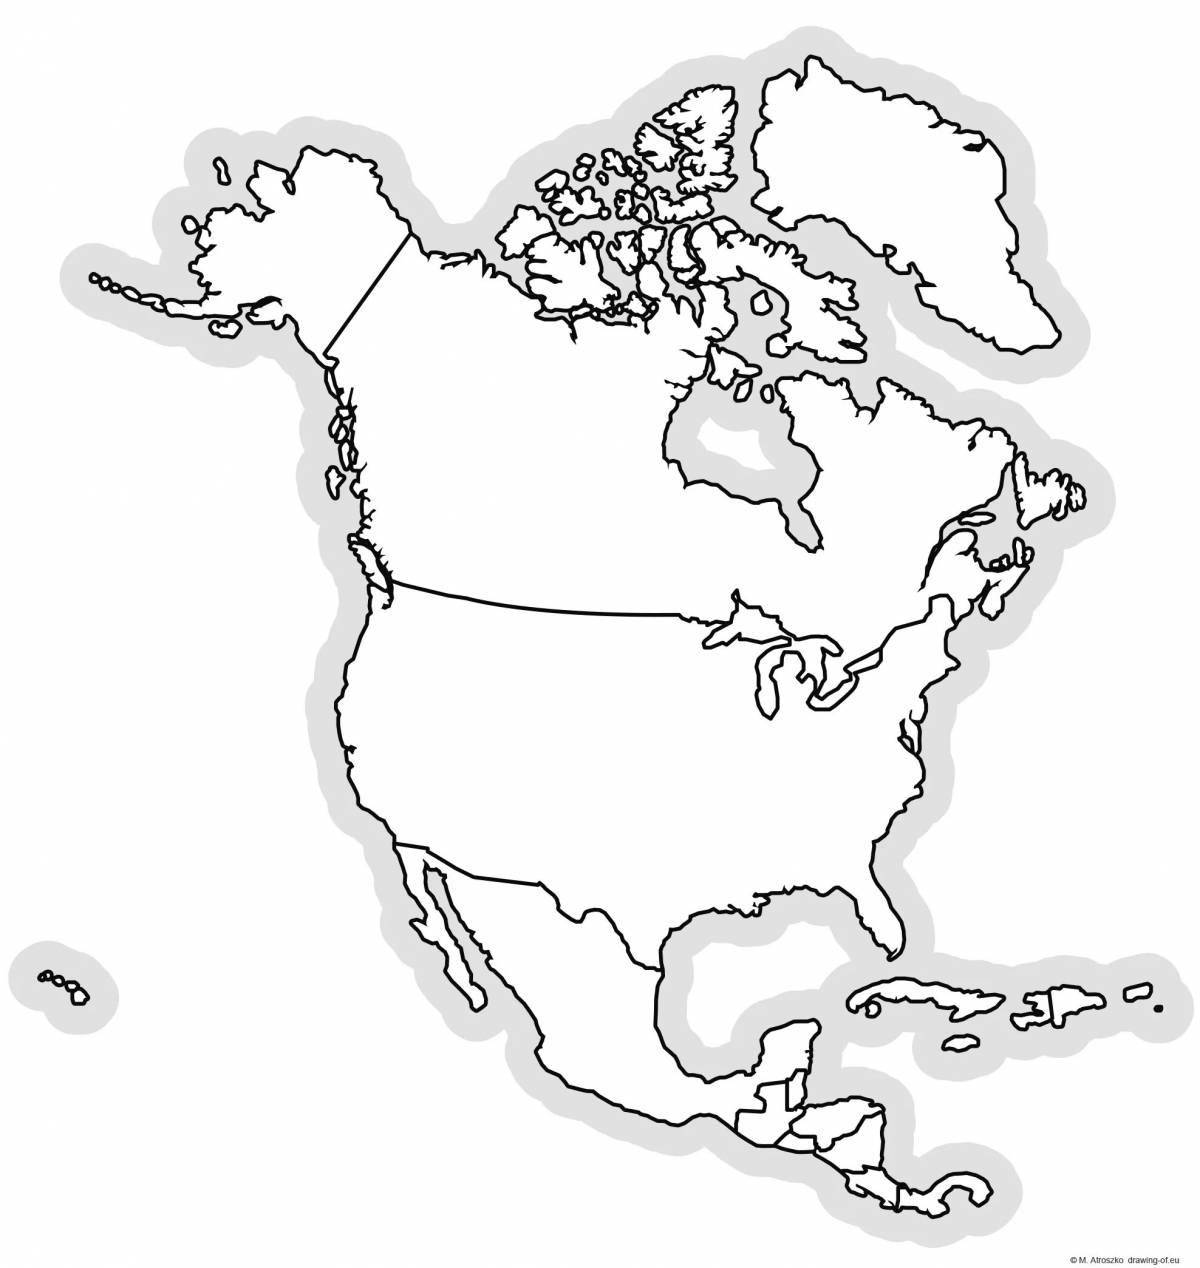 North America detailed coloring book